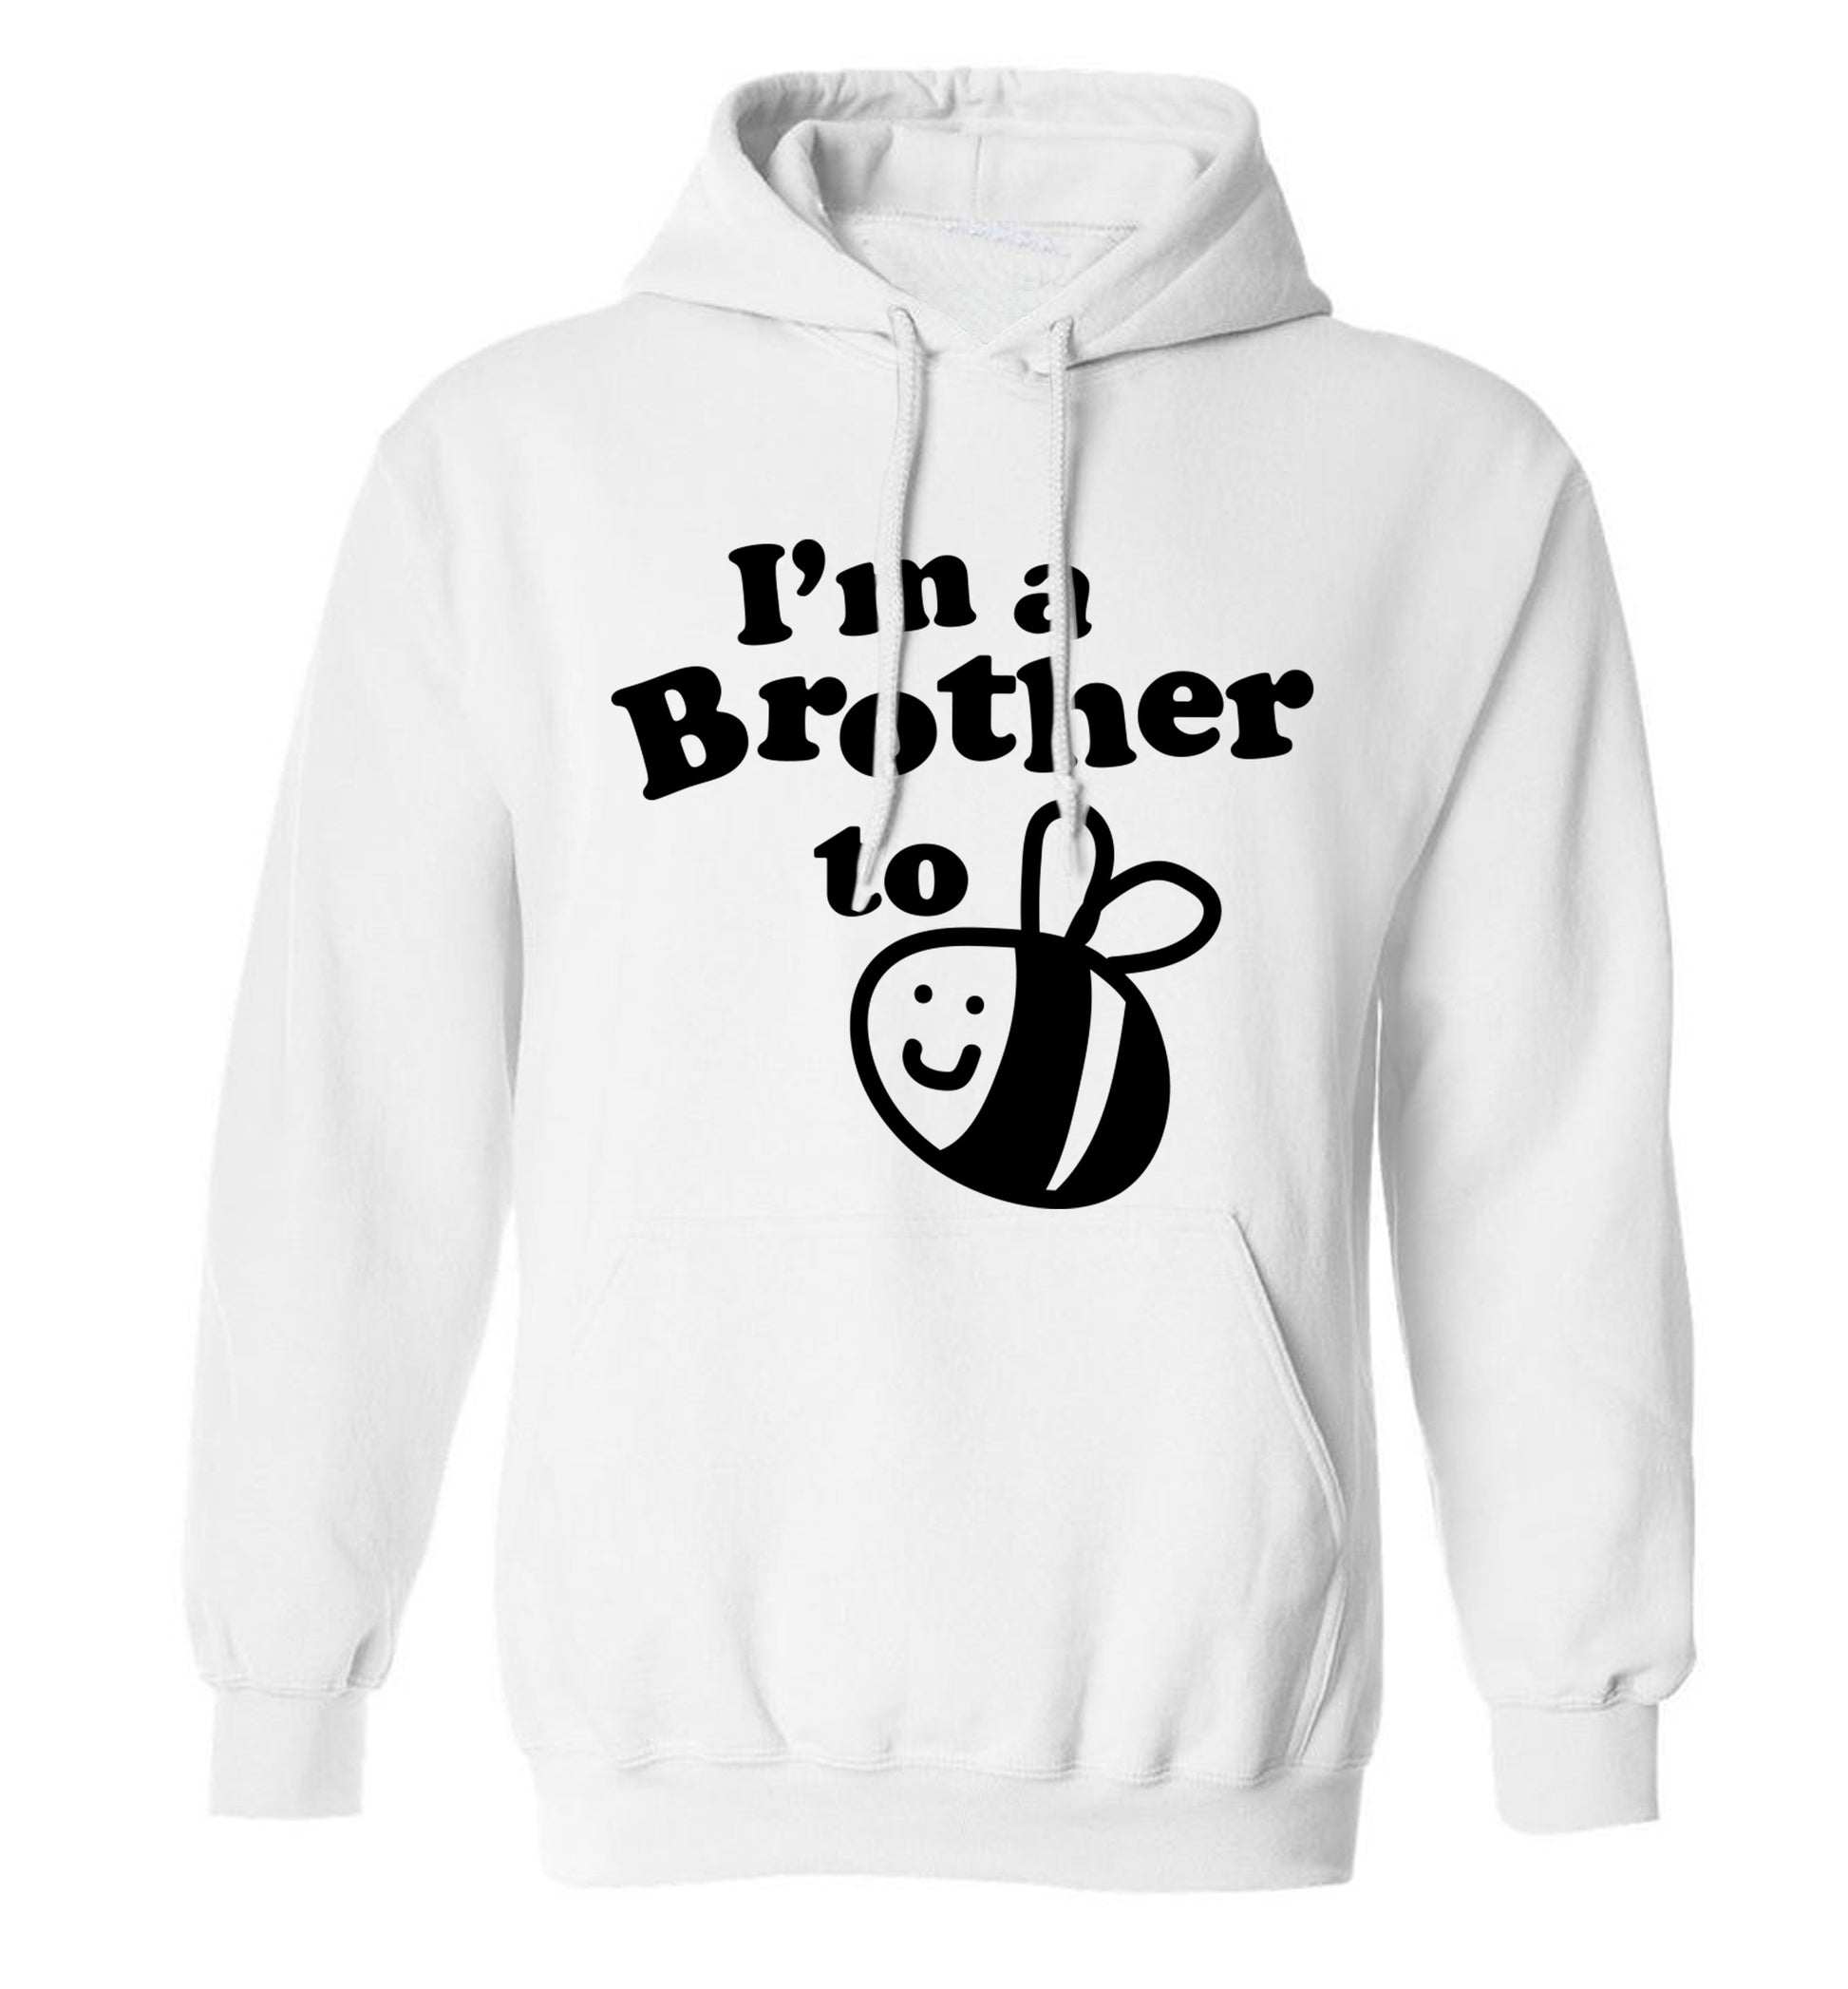 I'm a brother to be adults unisex white hoodie 2XL